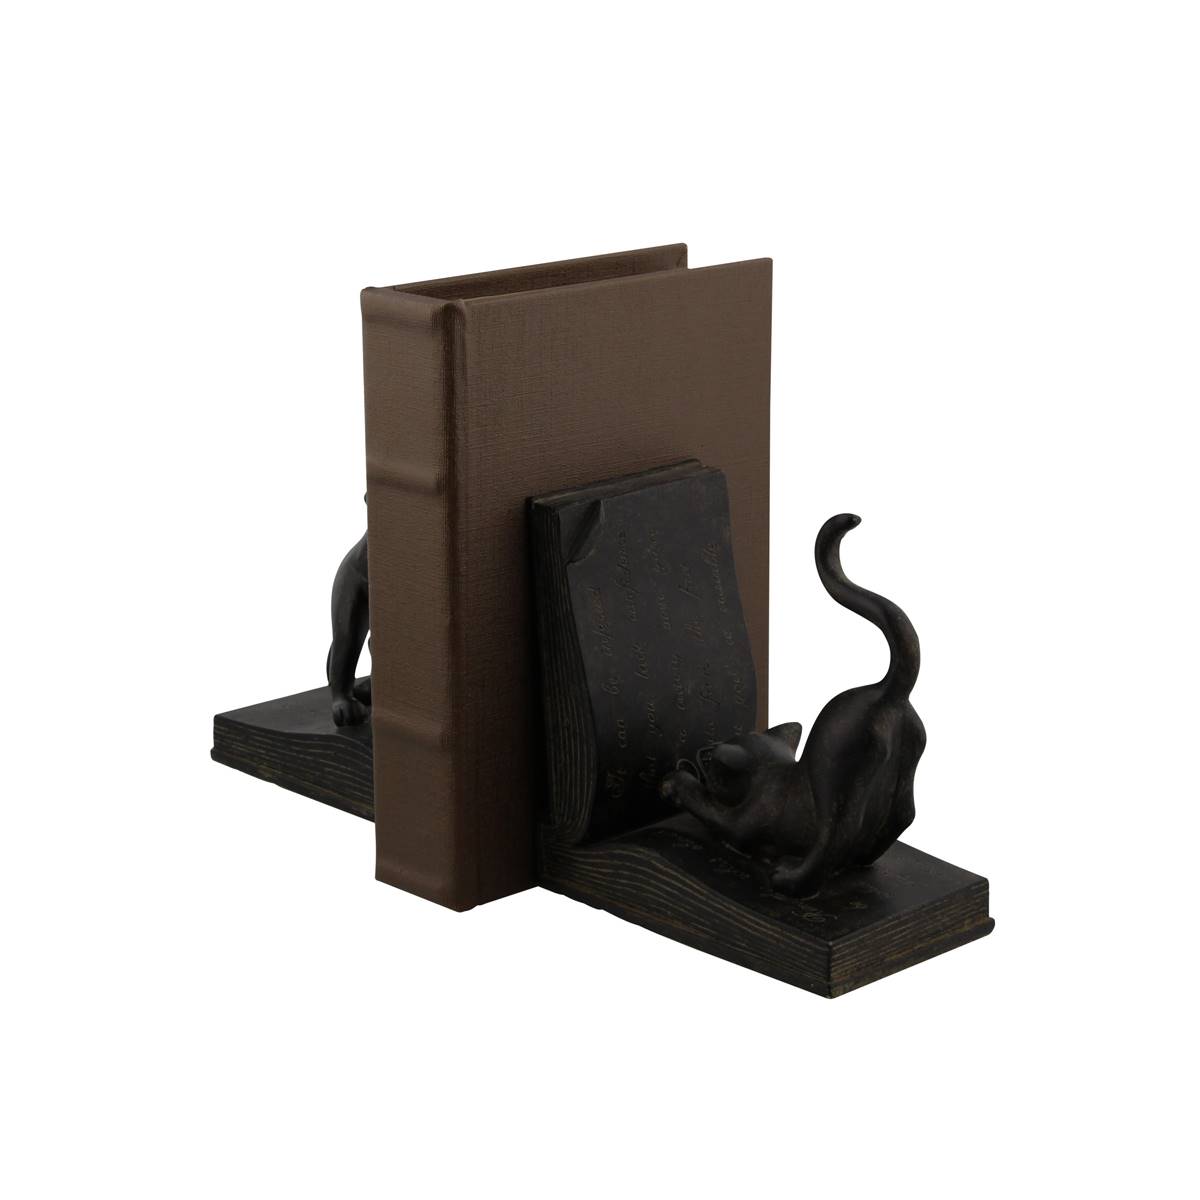 9th & Pike(R) Rustic Book And Cat Bookend Pair